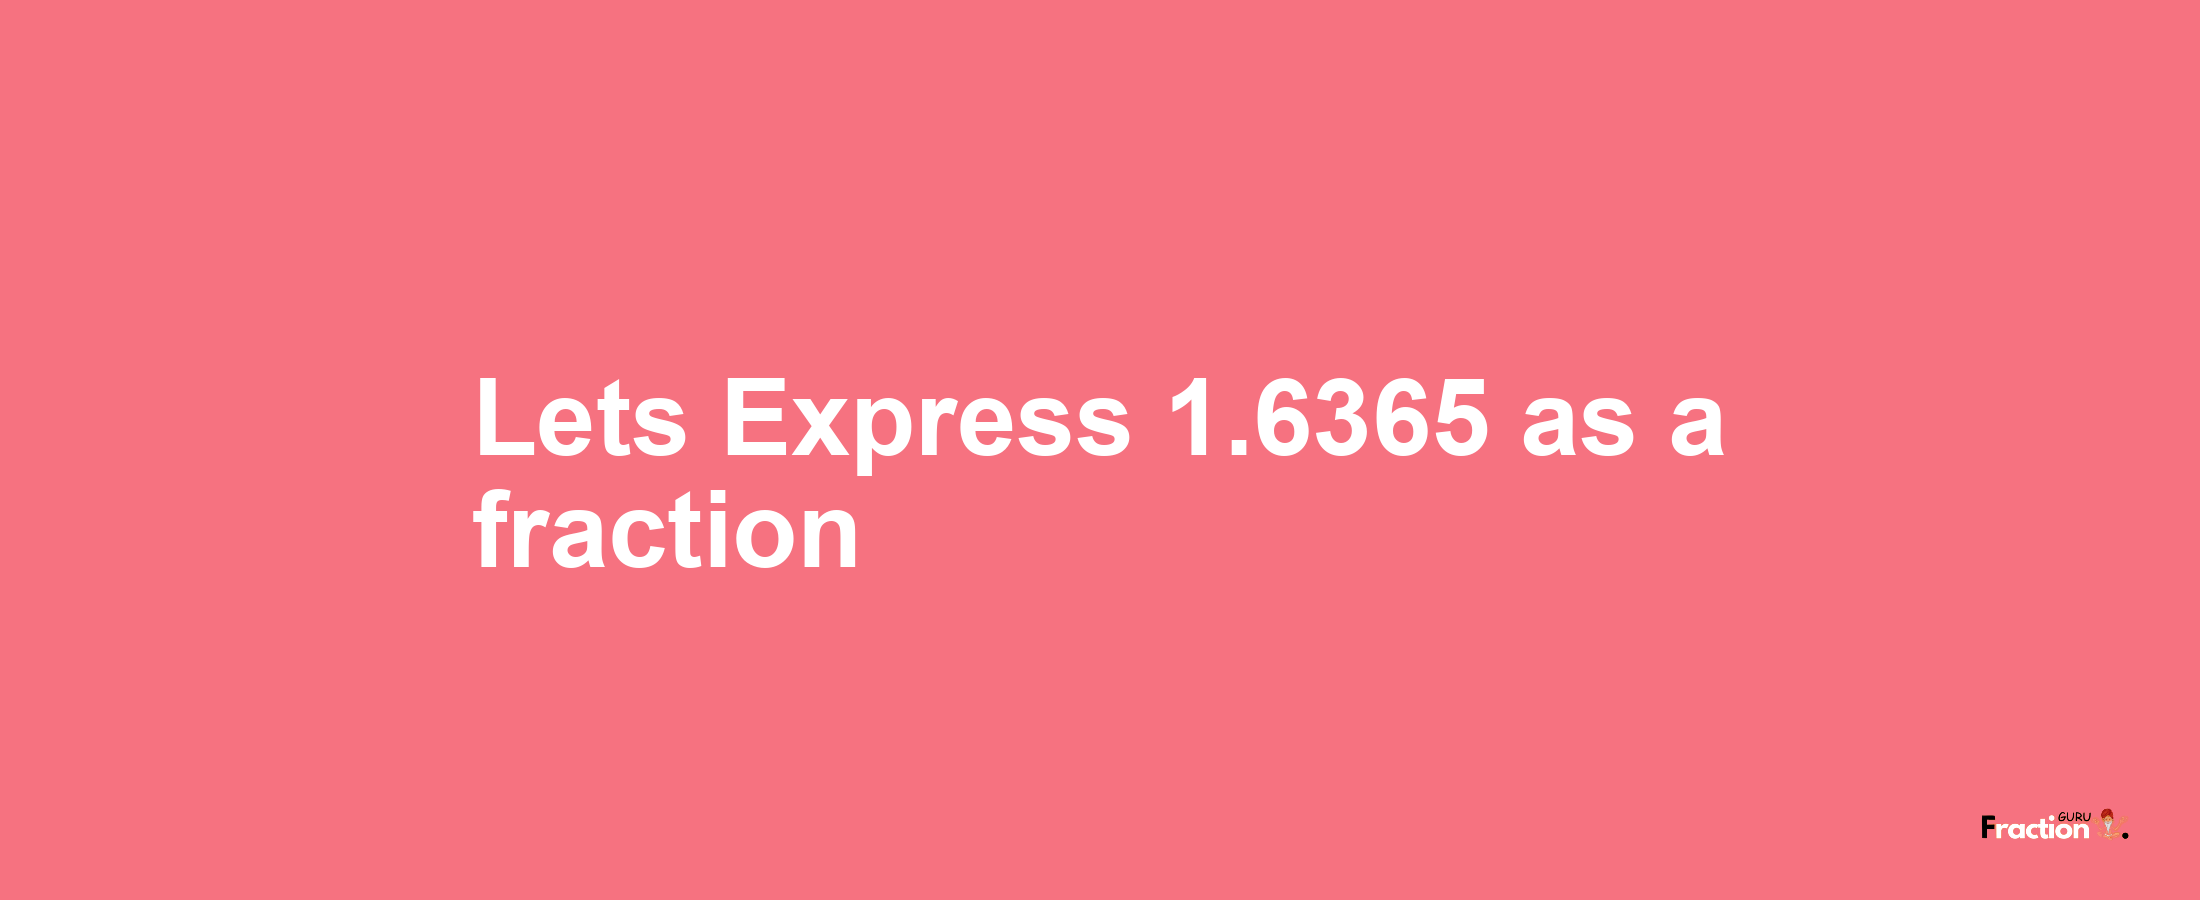 Lets Express 1.6365 as afraction